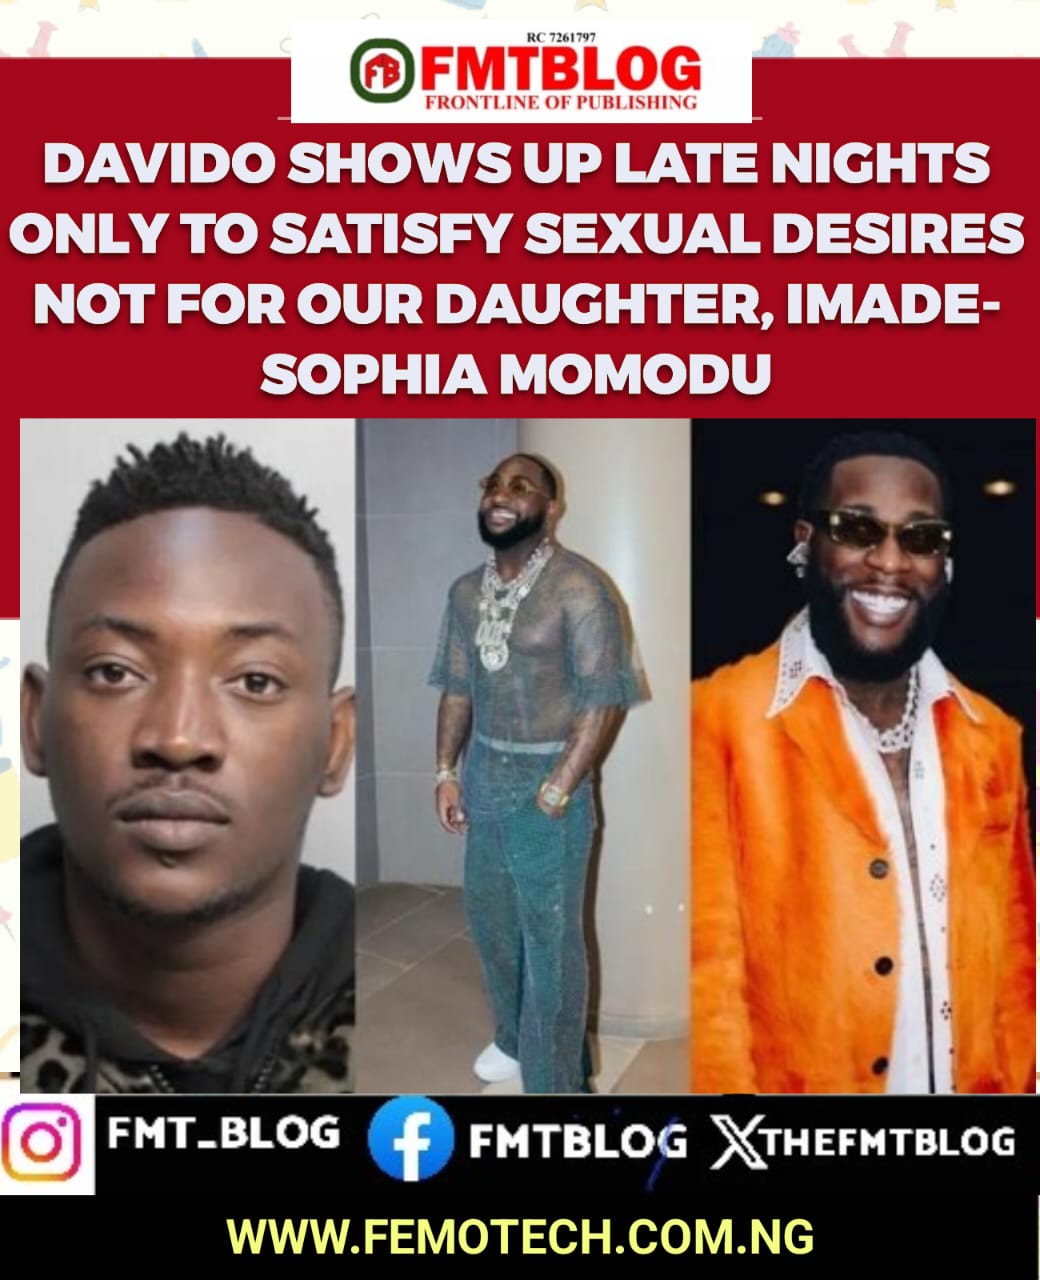 Davido Shows Up Late Nights Only To Satisfy His Sexual Desires, Not For Our Daughter, Imade- Sophia Momodu